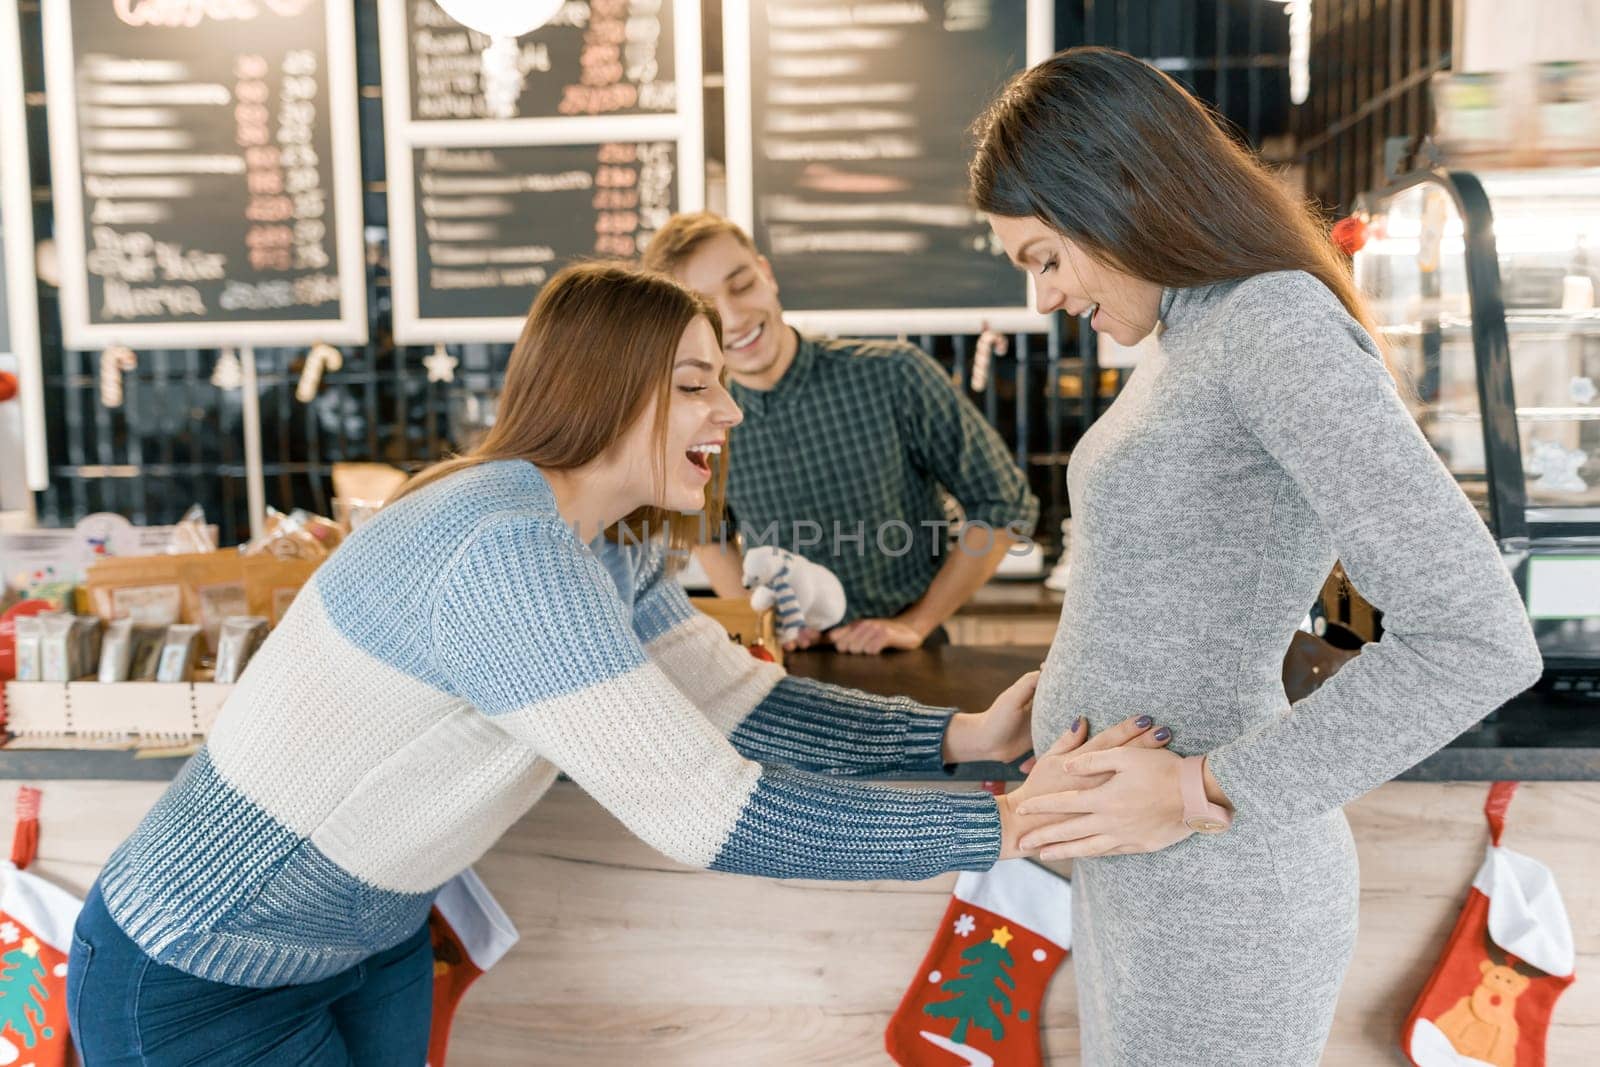 Pregnant woman who told her friends good news motherhood, girlfriend joyfully reacting, touches the belly